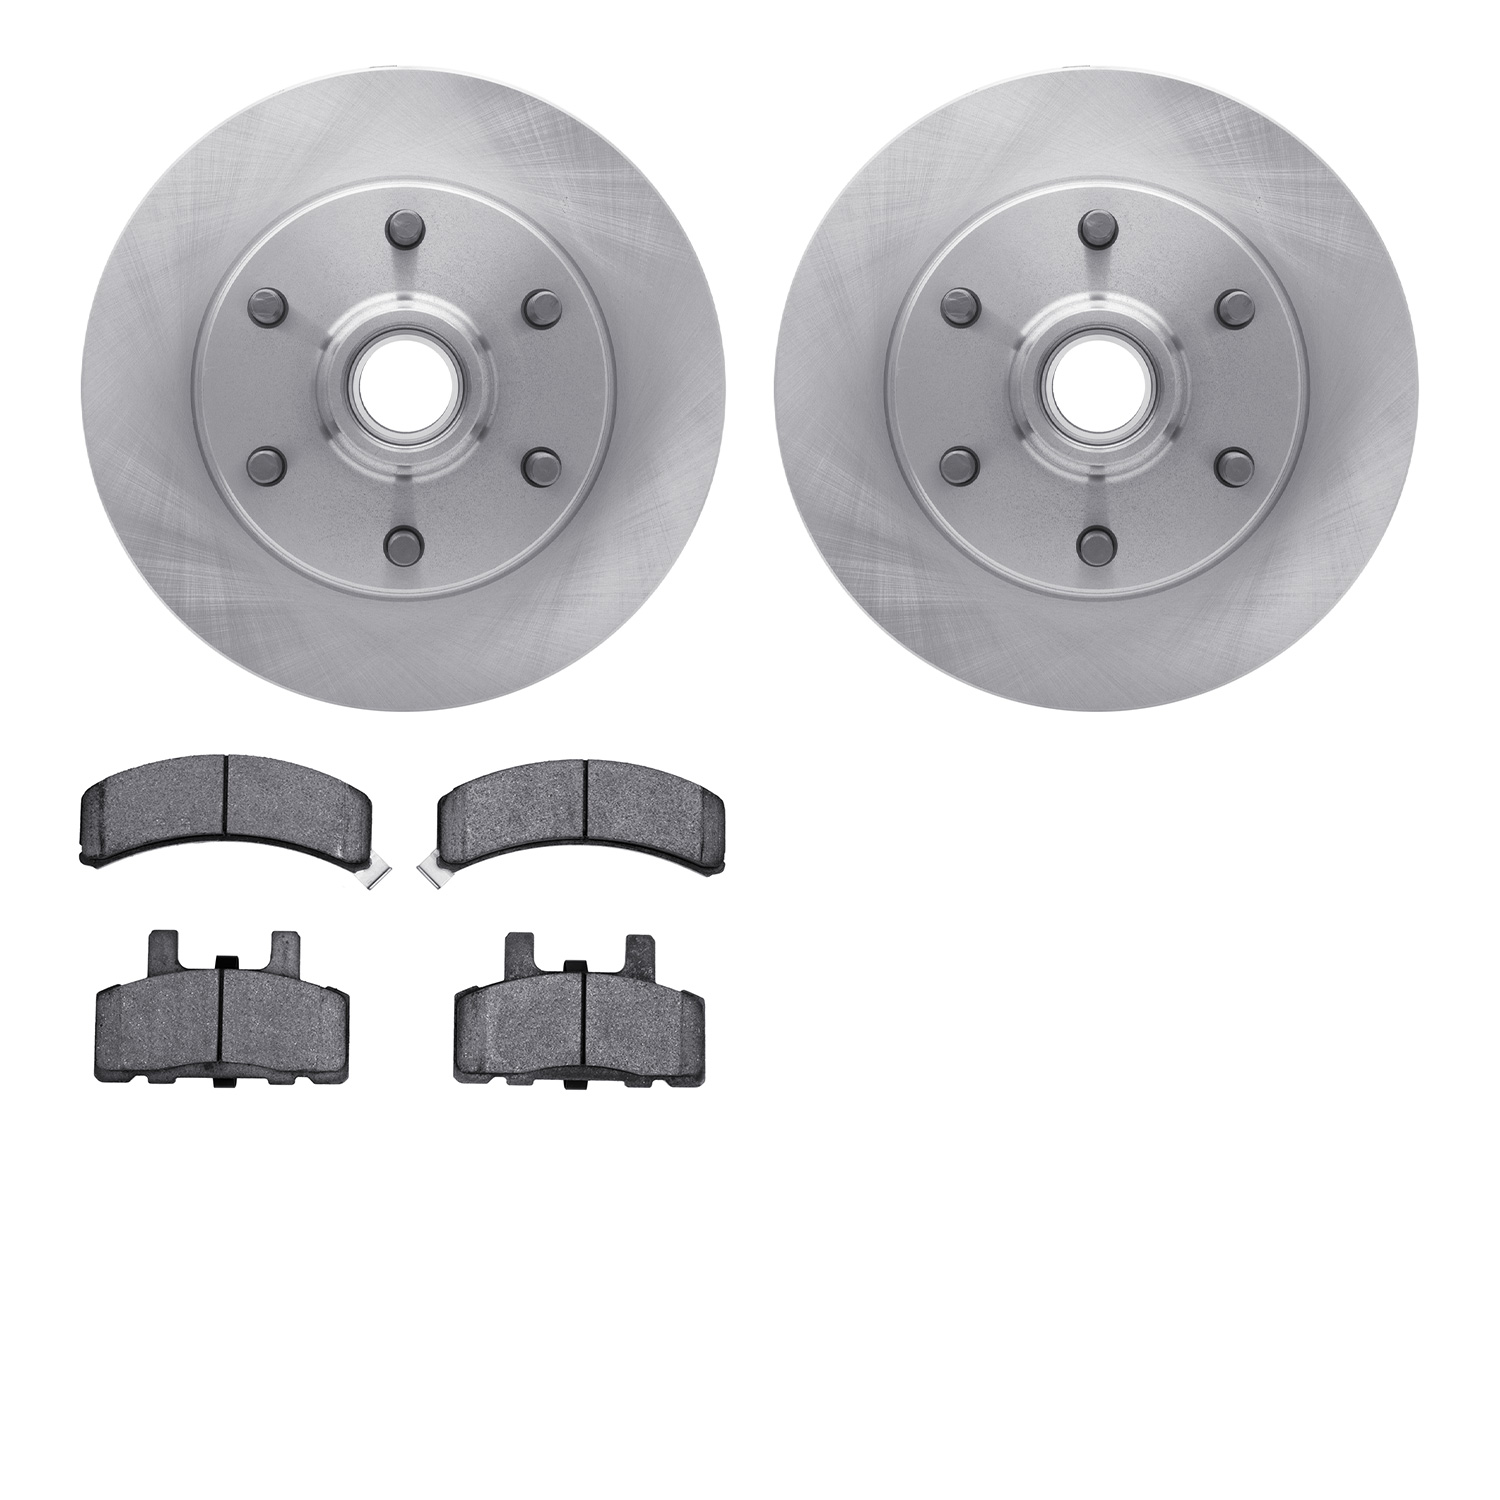 6402-48016 Brake Rotors with Ultimate-Duty Brake Pads, 1988-1996 GM, Position: Front